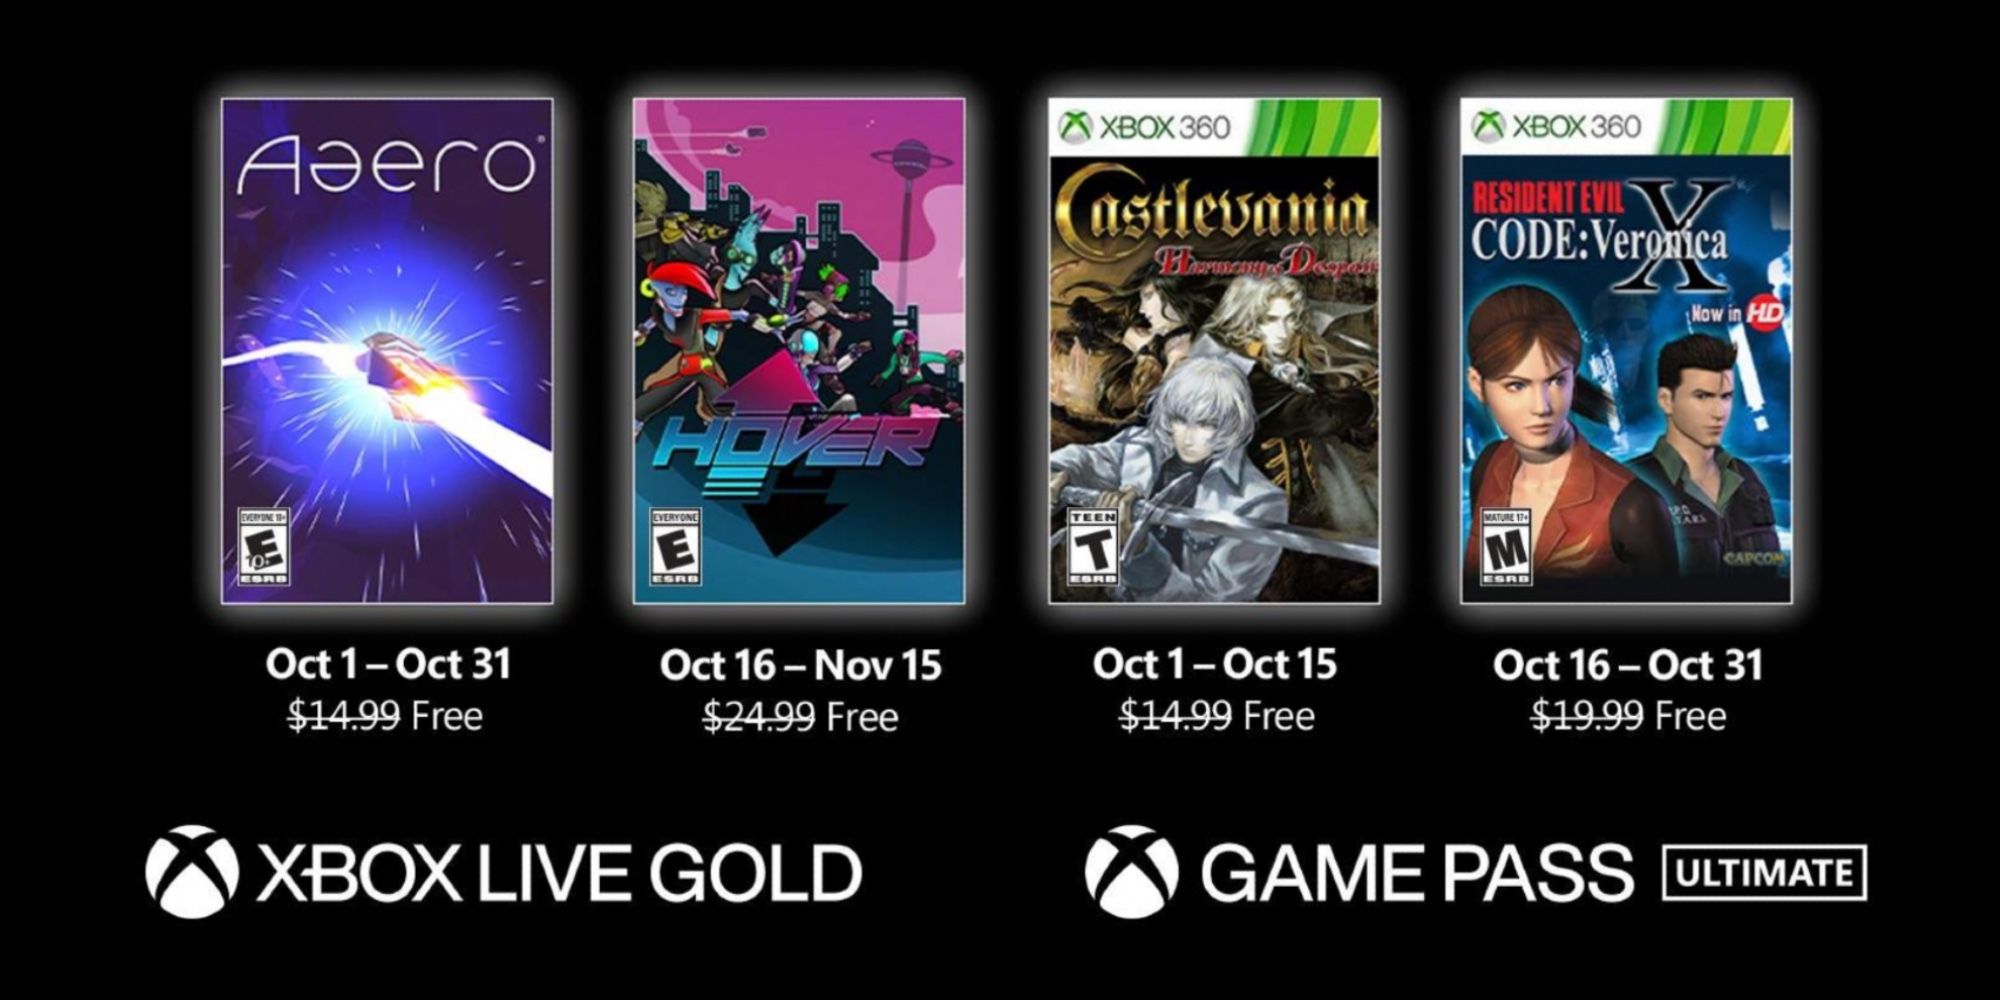 audit vrede Bereid Resident Evil And Castlevania Head To Xbox Games With Gold In October